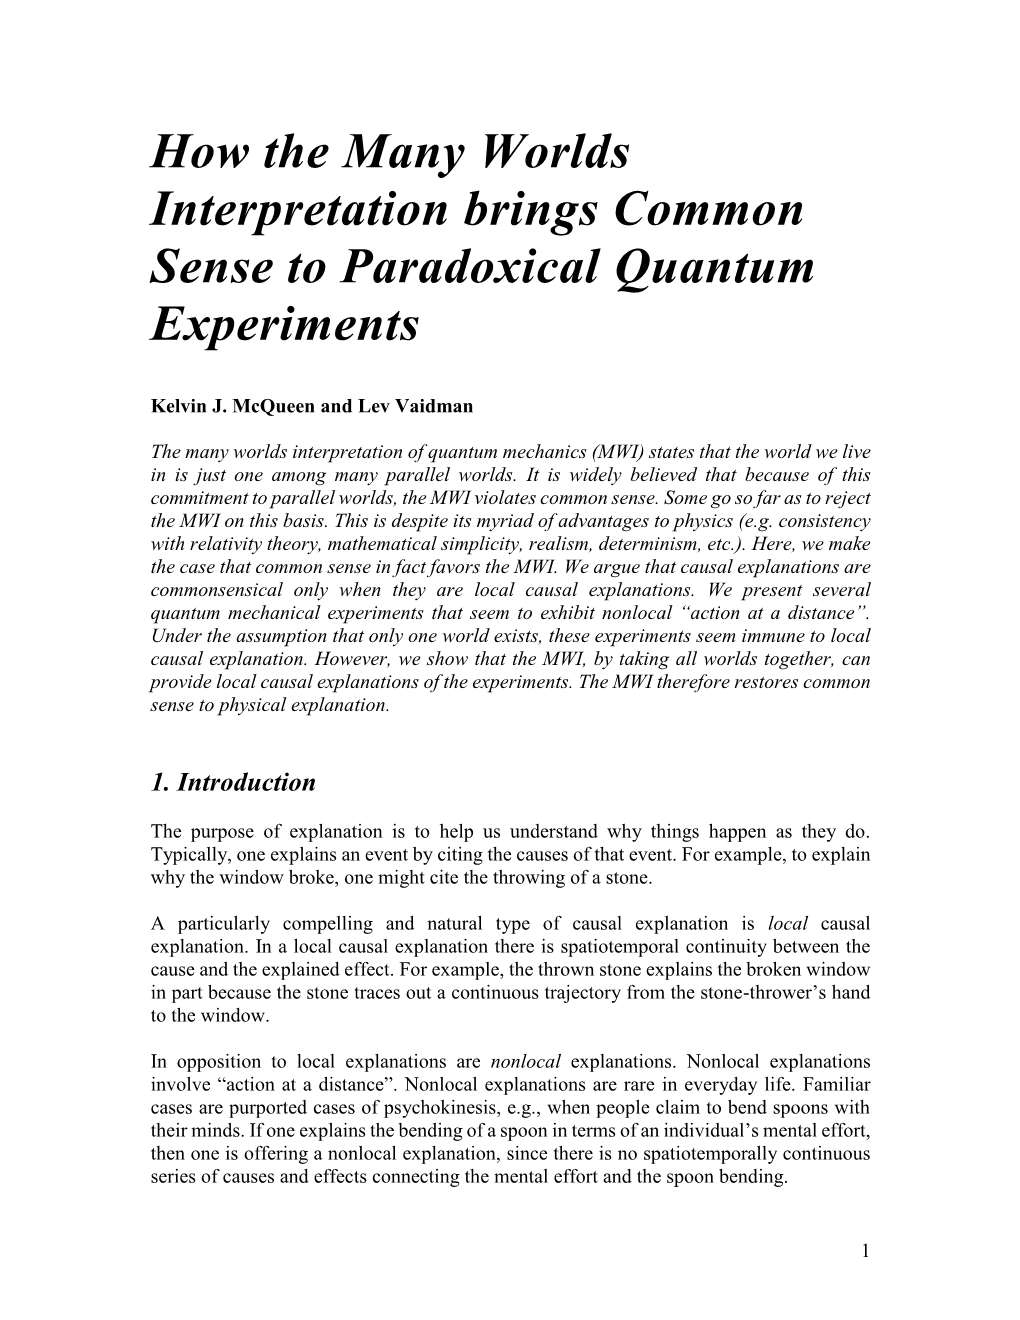 How the Many Worlds Interpretation Brings Common Sense to Paradoxical Quantum Experiments